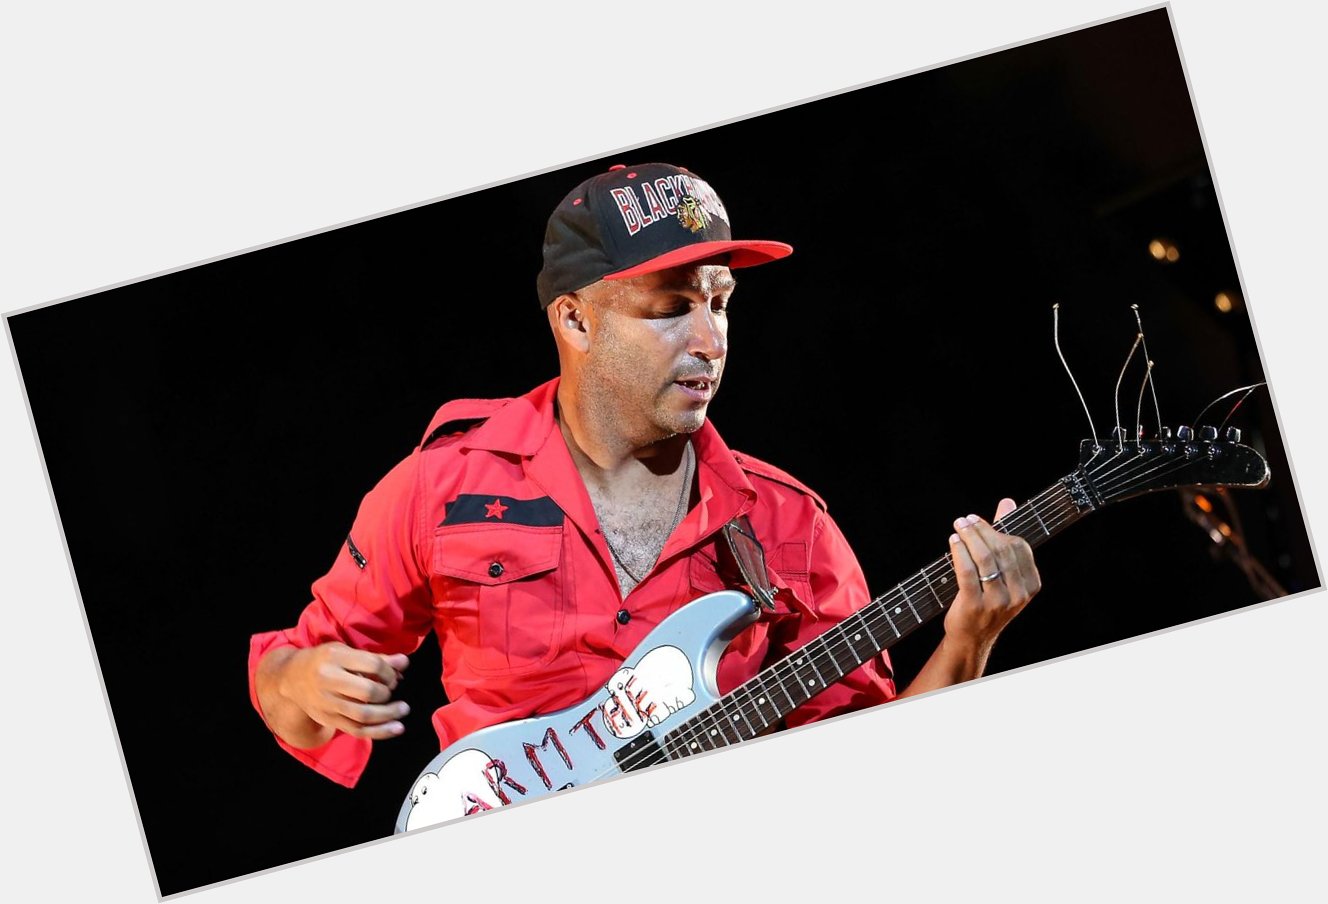 May 30, wish Happy Birthday to American guitarist, frontmen of rock band RATM & Audioslave, Tom Morello. 